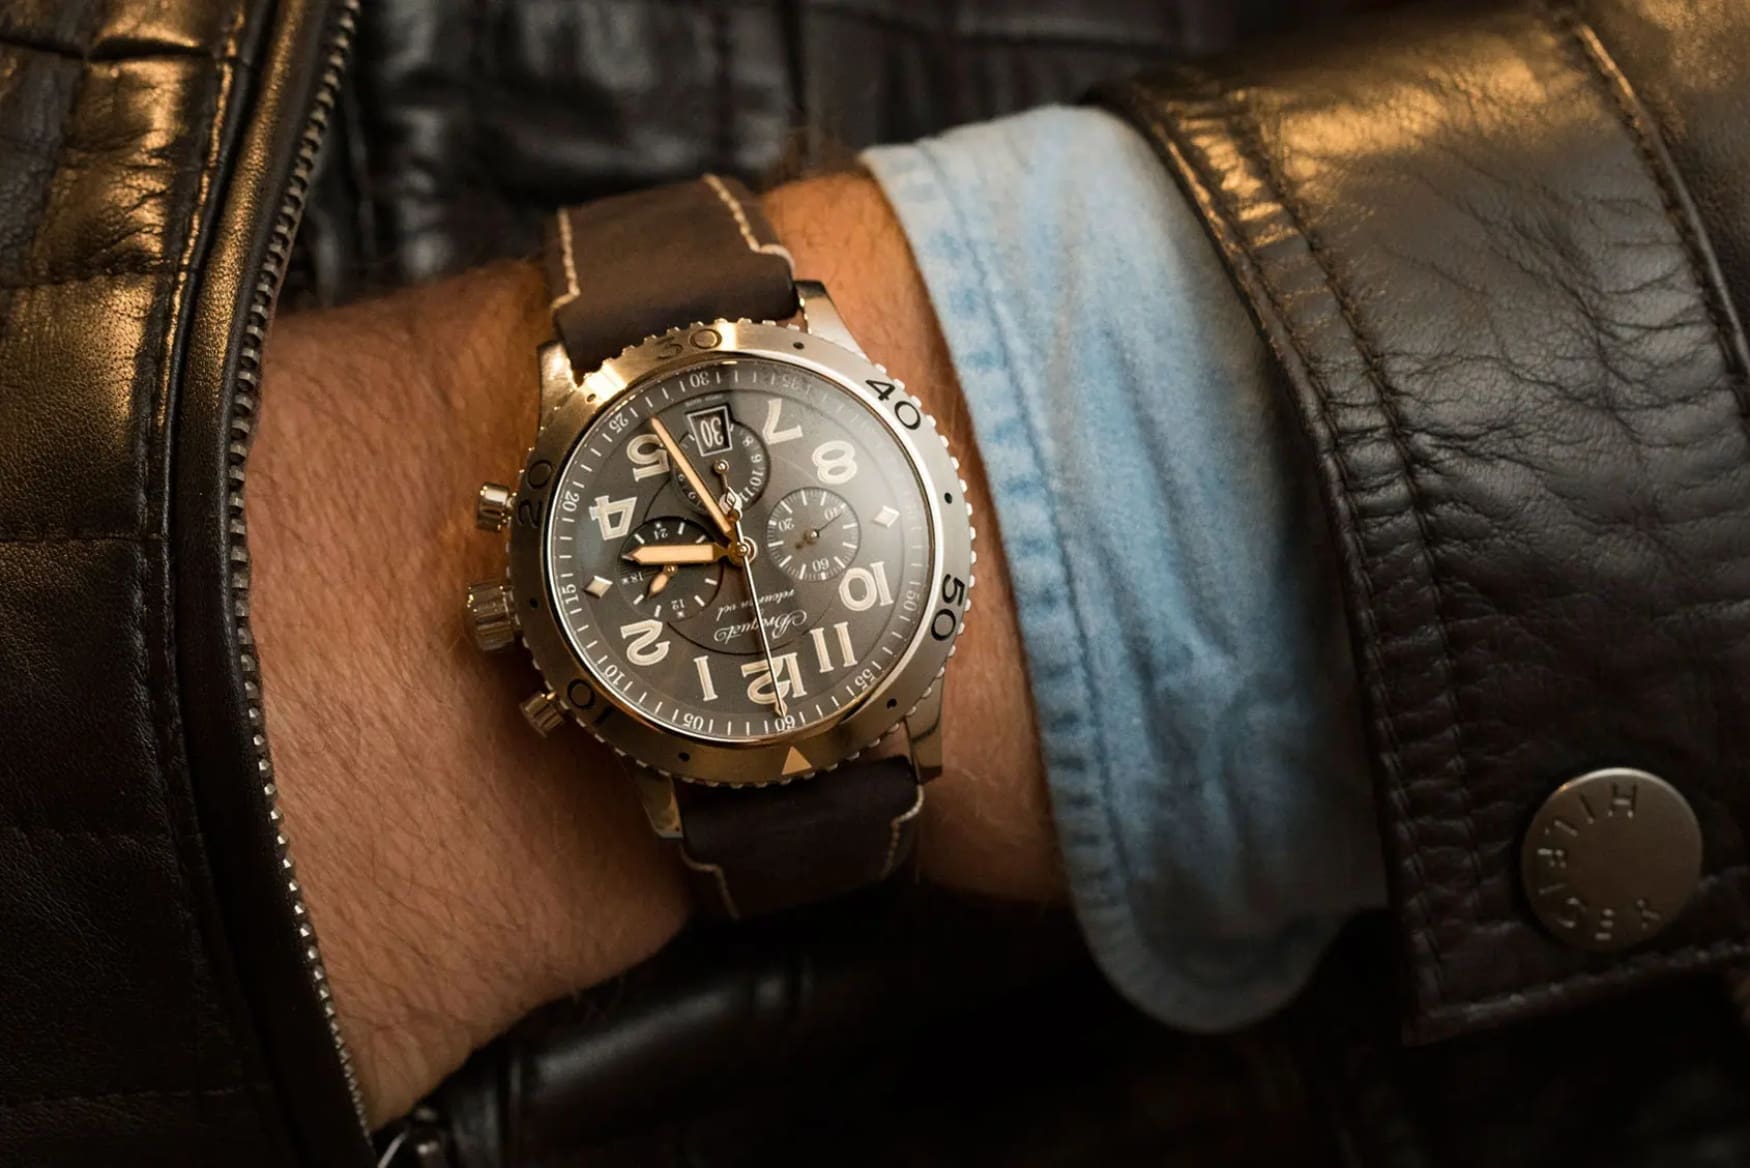 T+T Holiday Picks: The best watches to gift for $5,000 – $10,000 (2022 edition)